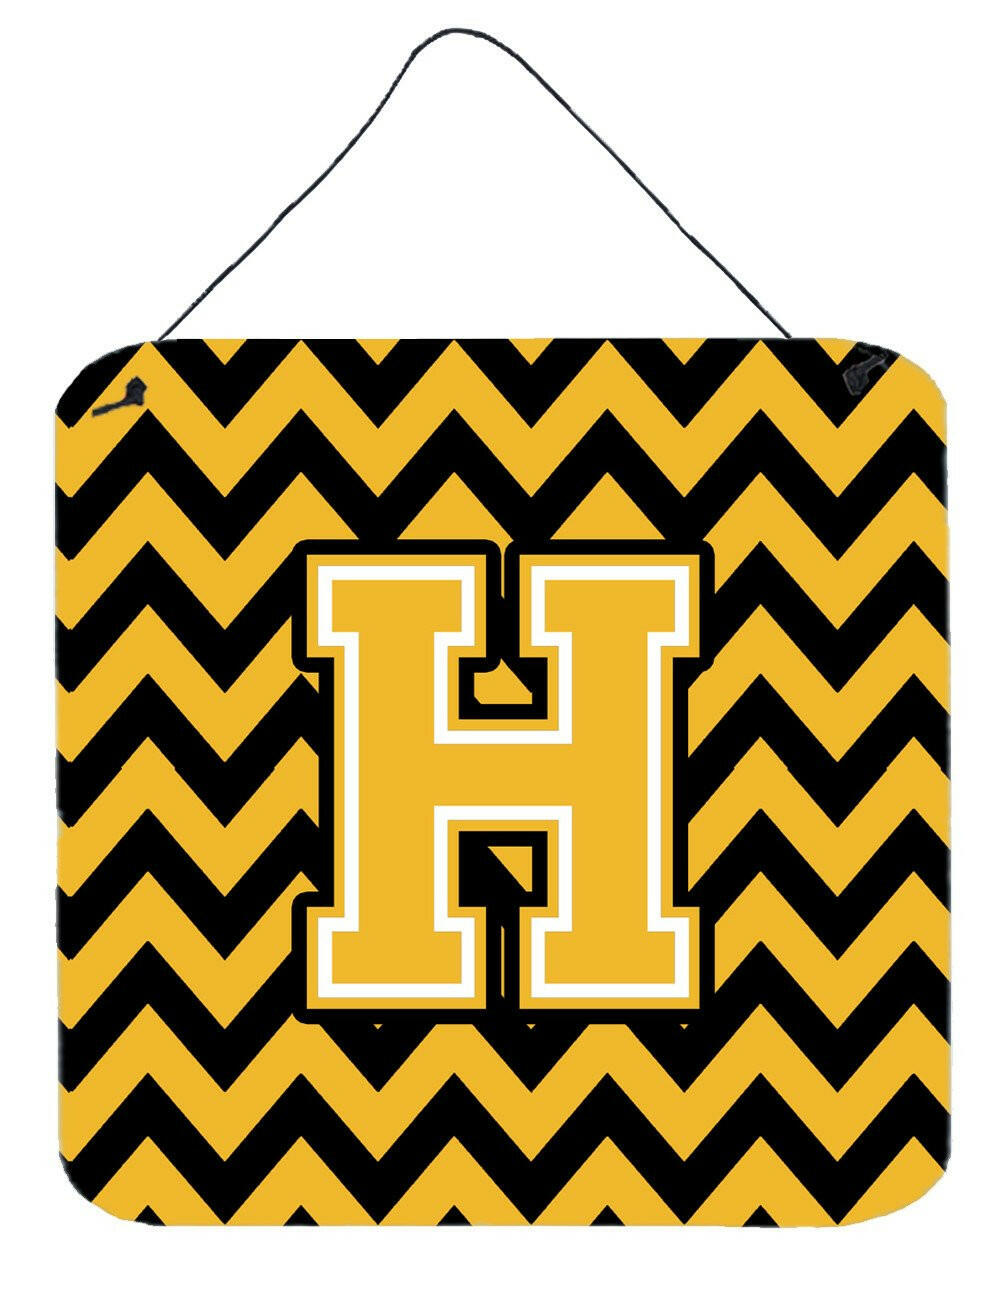 Letter H Chevron Black and Gold Wall or Door Hanging Prints CJ1053-HDS66 by Caroline's Treasures